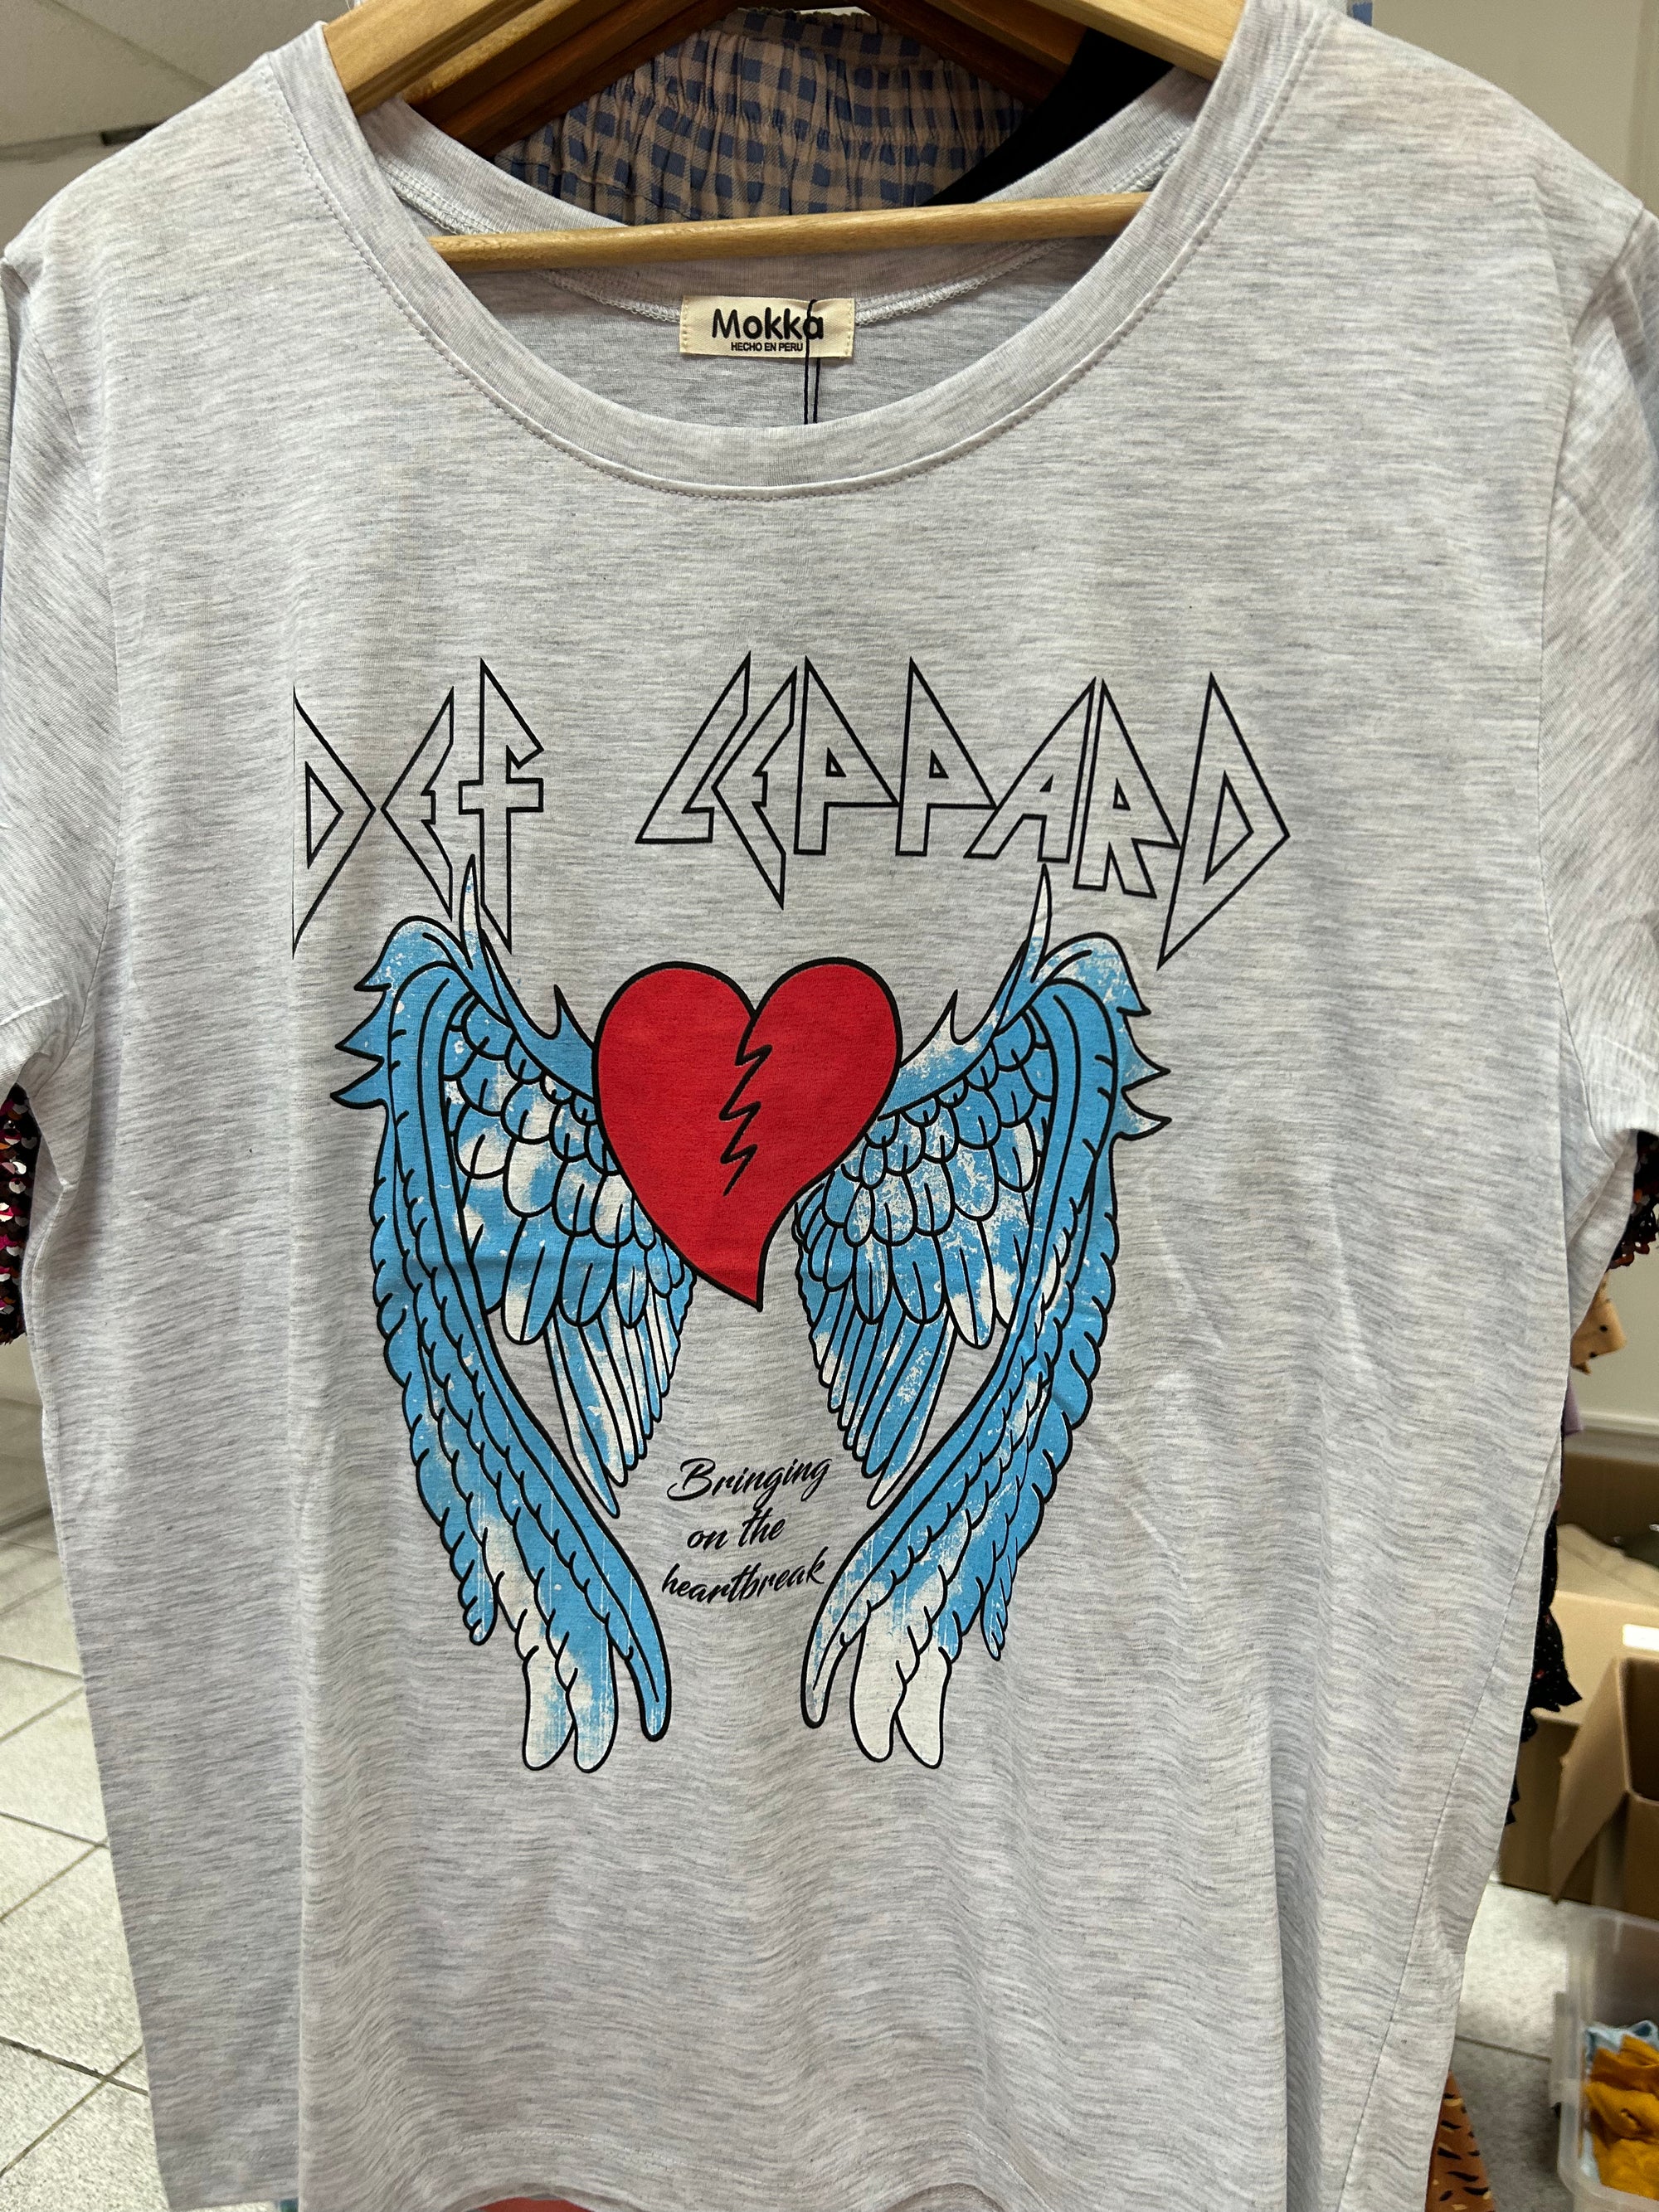 GRAPHIC TEE DEF LEPPARD